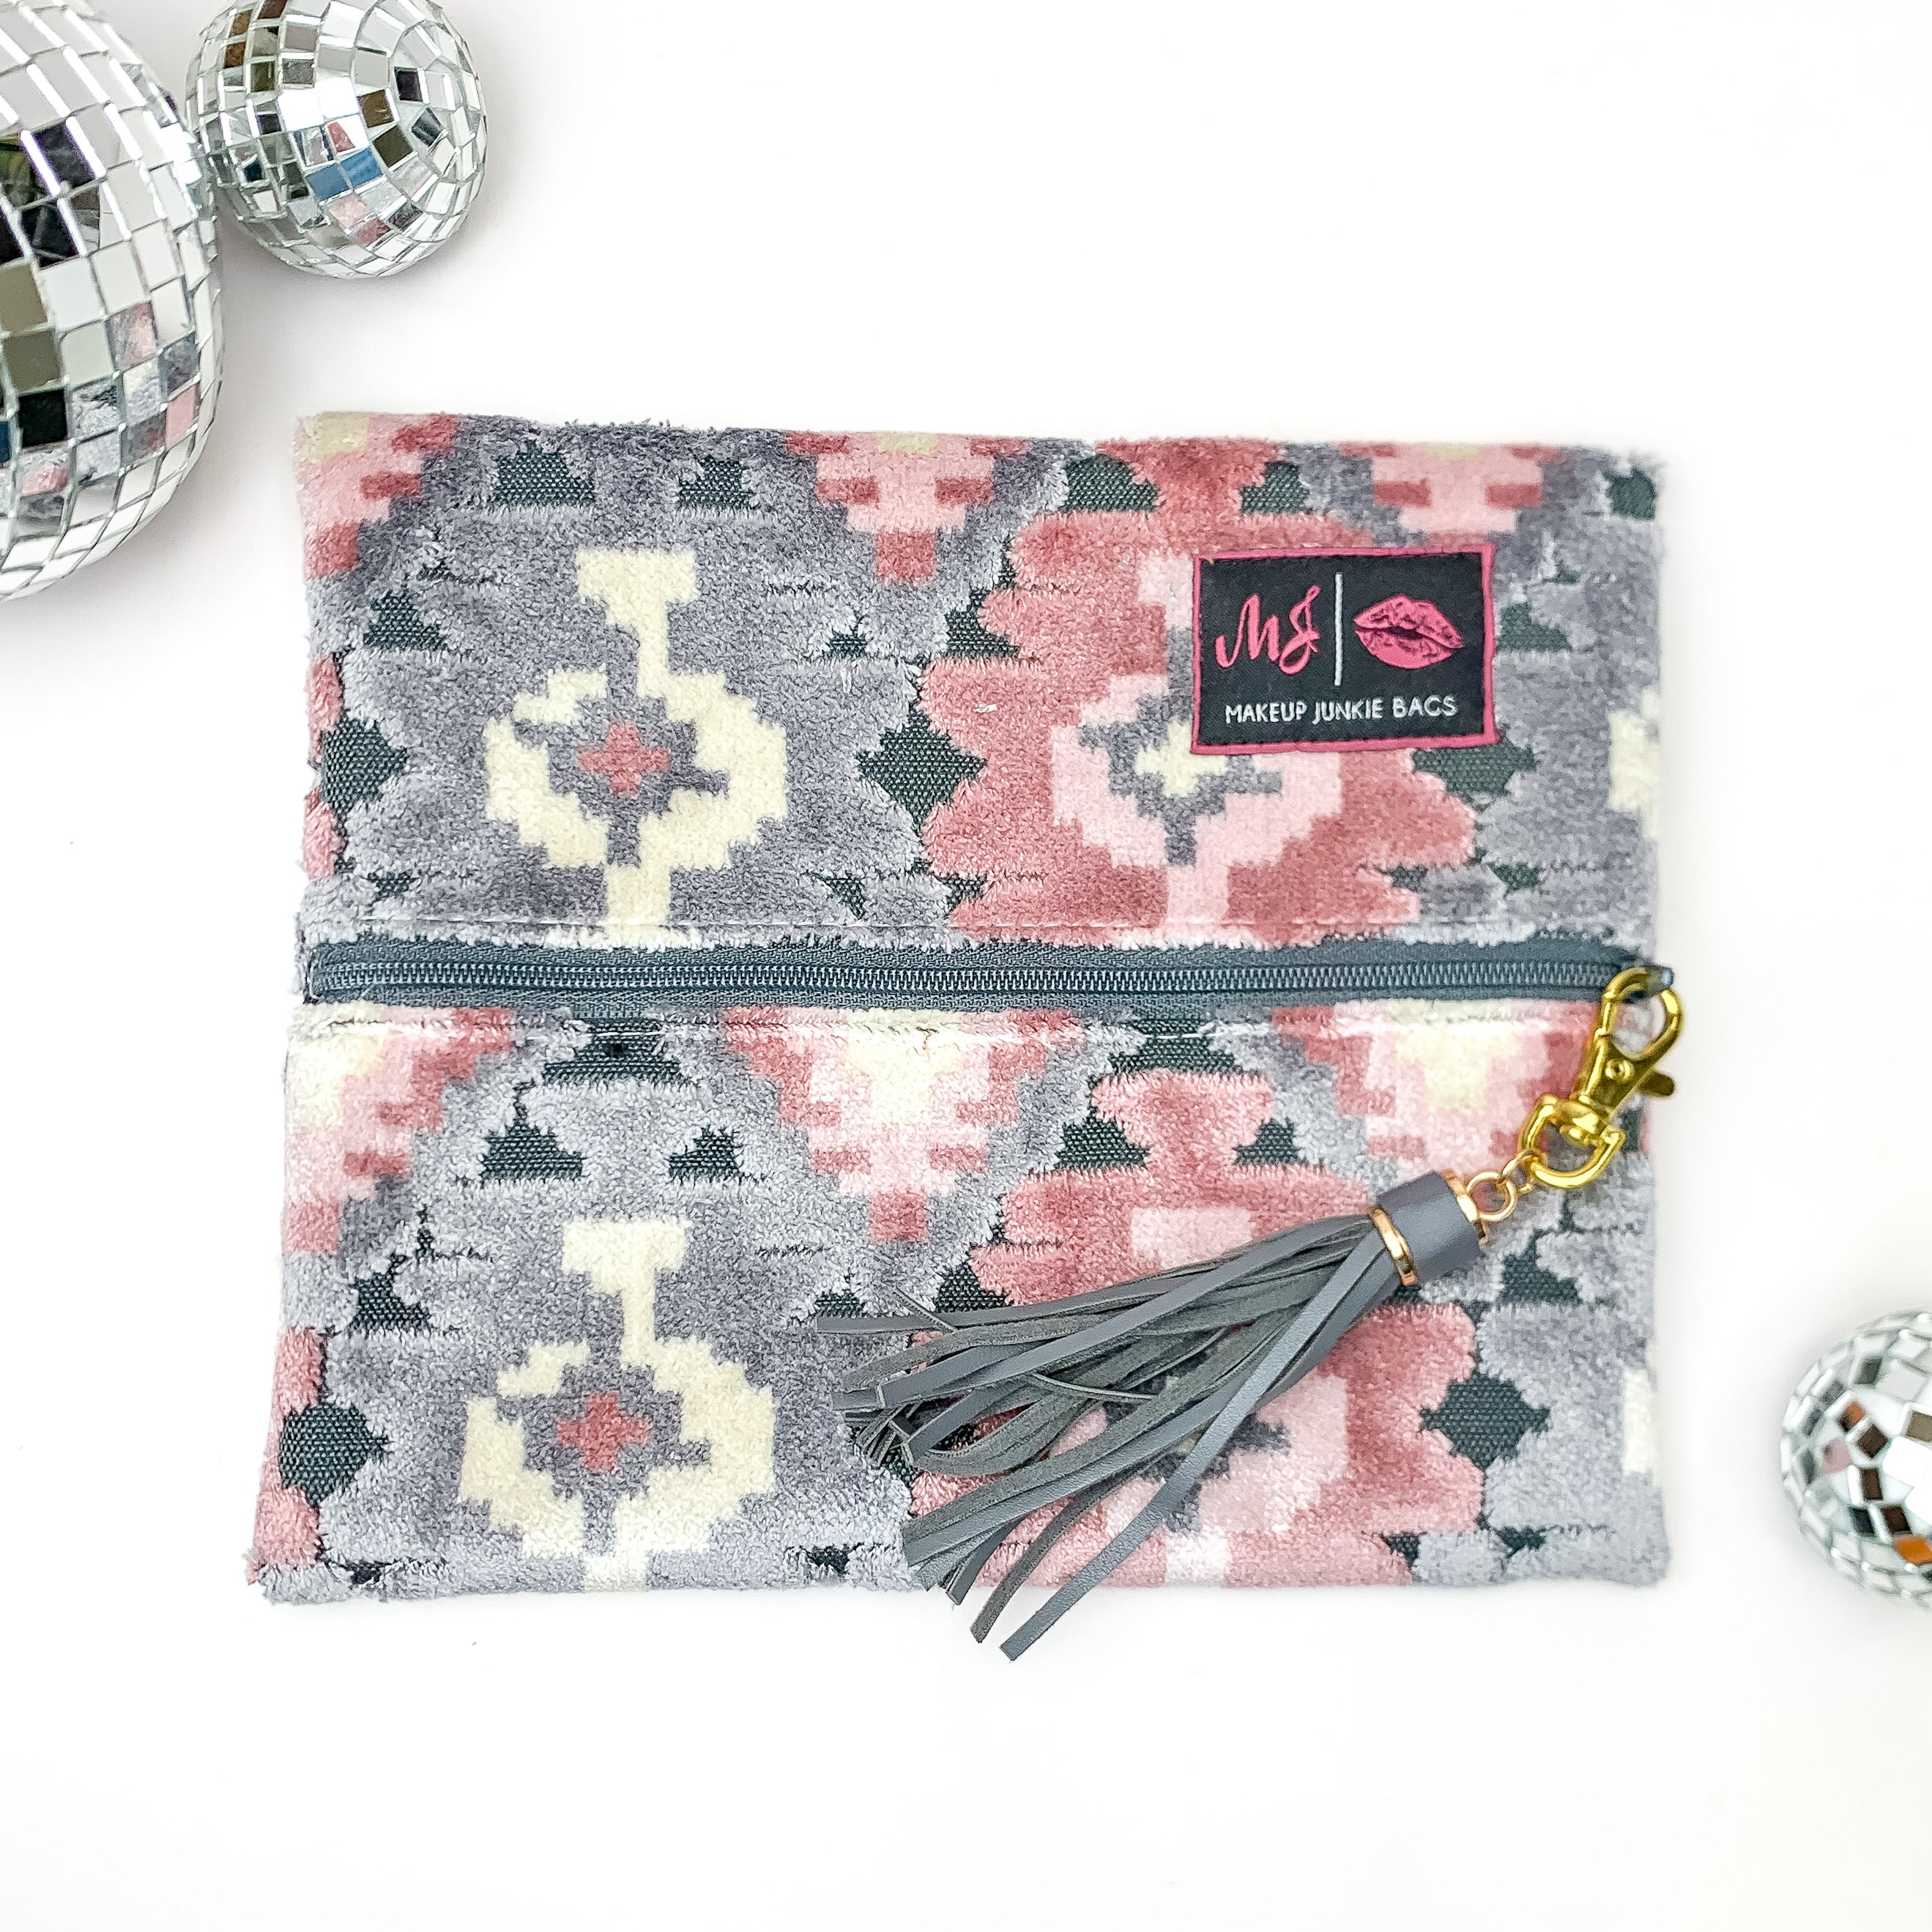 Makeup Junkie | Small Blush Aztec Lay Flat Bag in Blush Pink and Grey Mix - Giddy Up Glamour Boutique